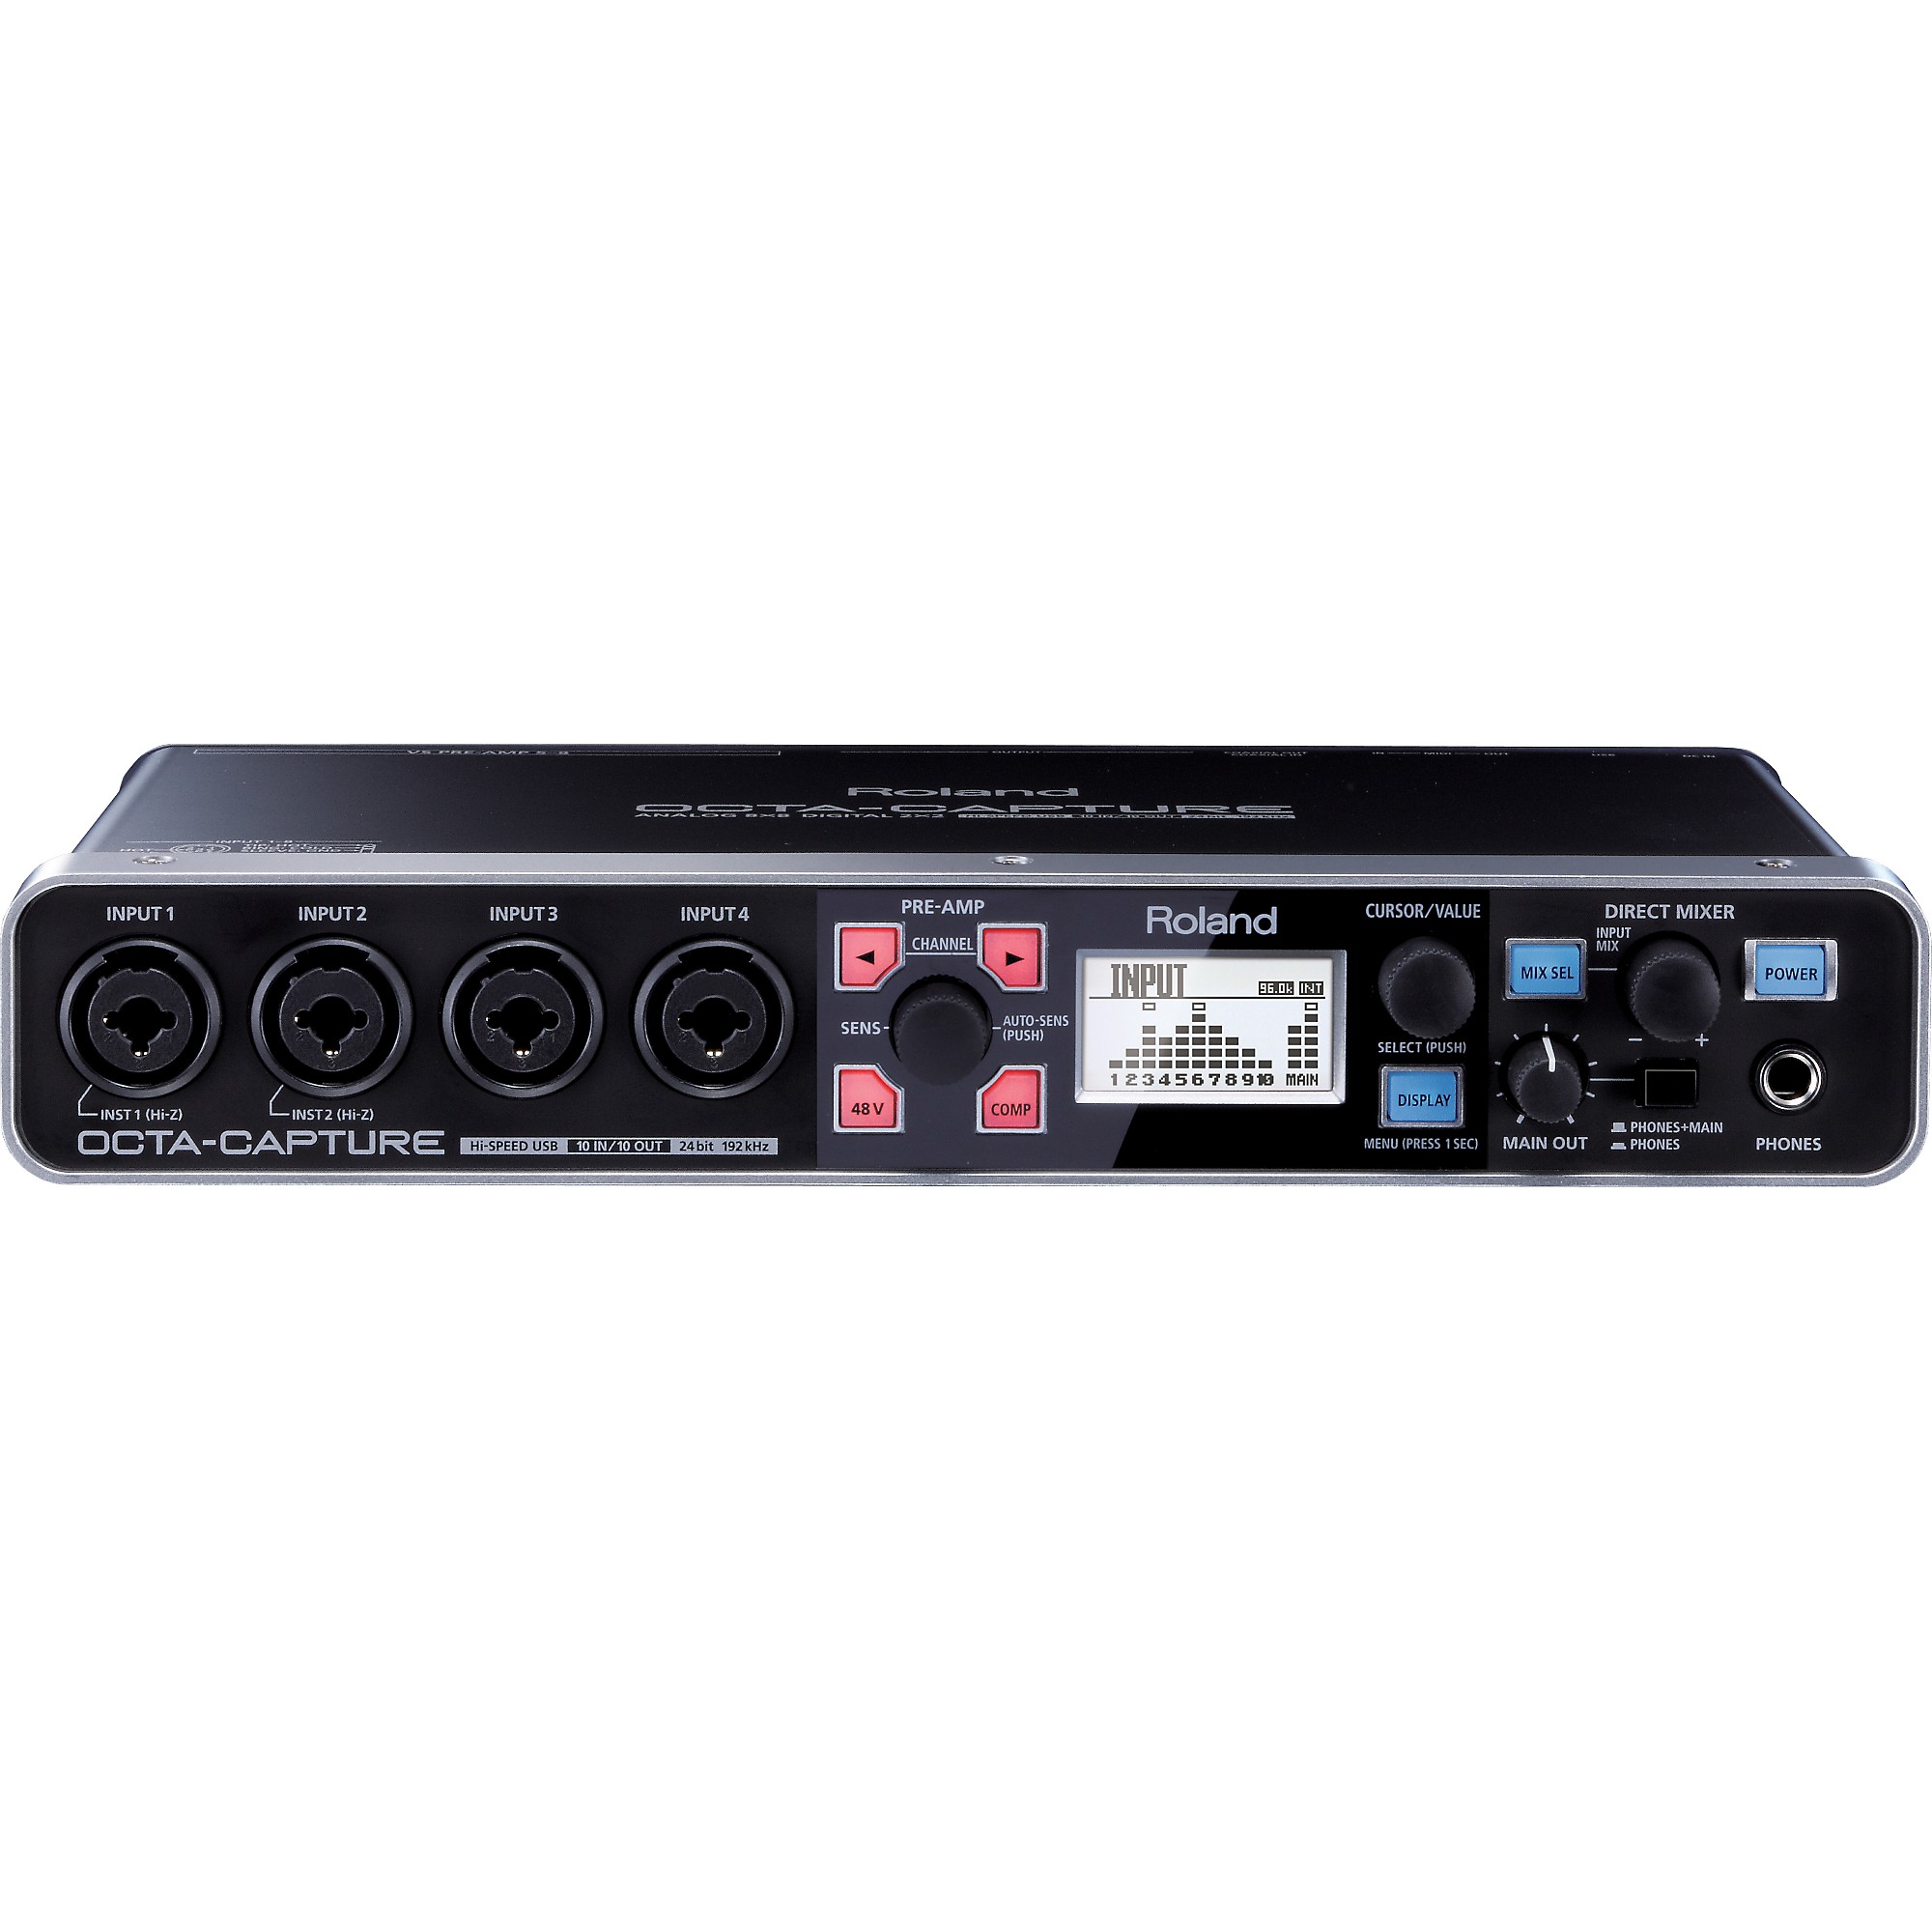  Tascam US-16x08 Rackmount USB Audio/MIDI Interface for  Recording, Drum Recording, 8 XLR/8 1/4 Inputs, 8 Outputs, Control  Software,Black : Musical Instruments